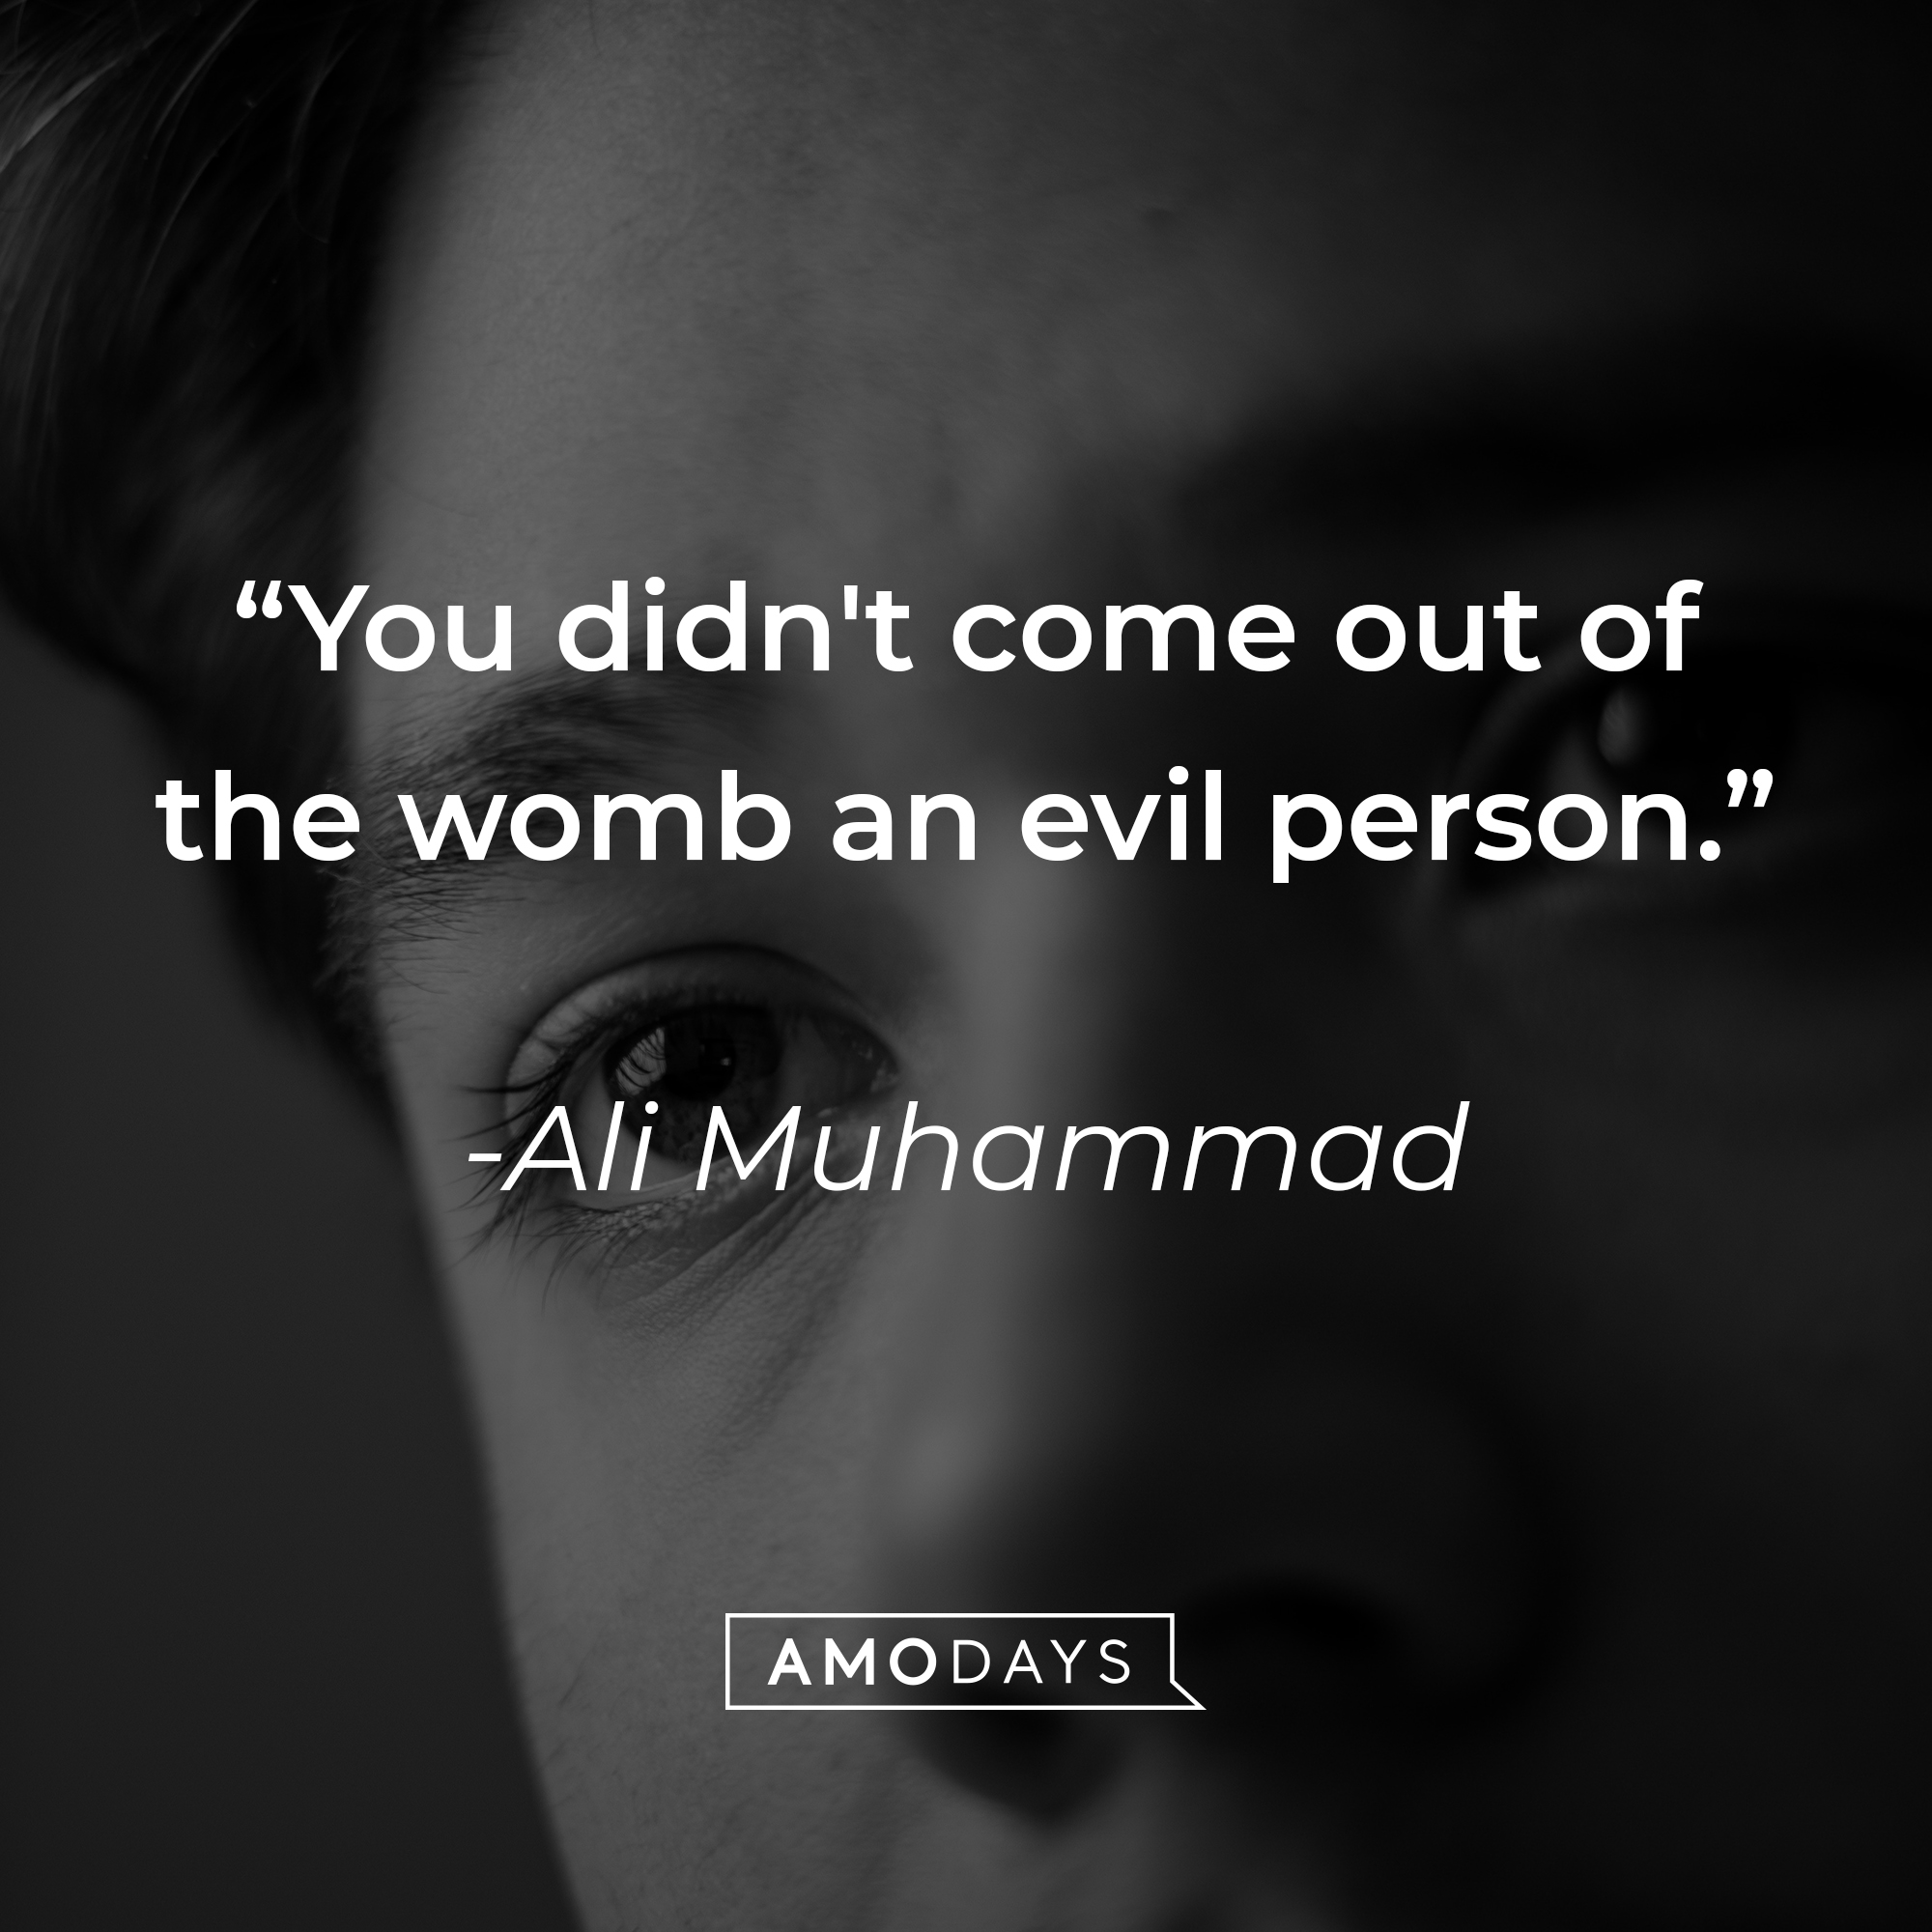 Ali Muhammad's quote: "You didn't come out of the womb an evil person." | Source: unsplash.com